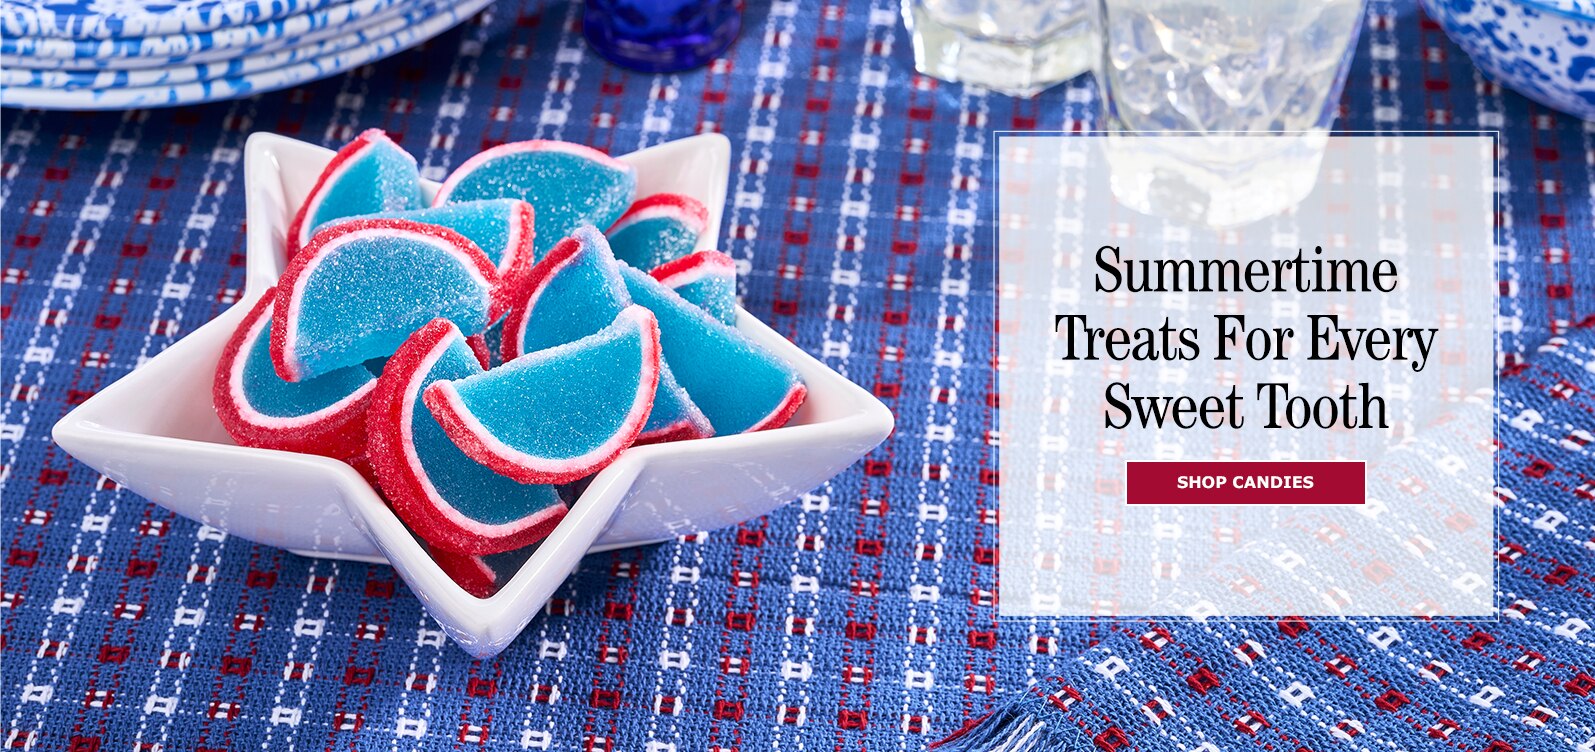 Summertime Treats for Every Sweet Tooth. Shop Candies.